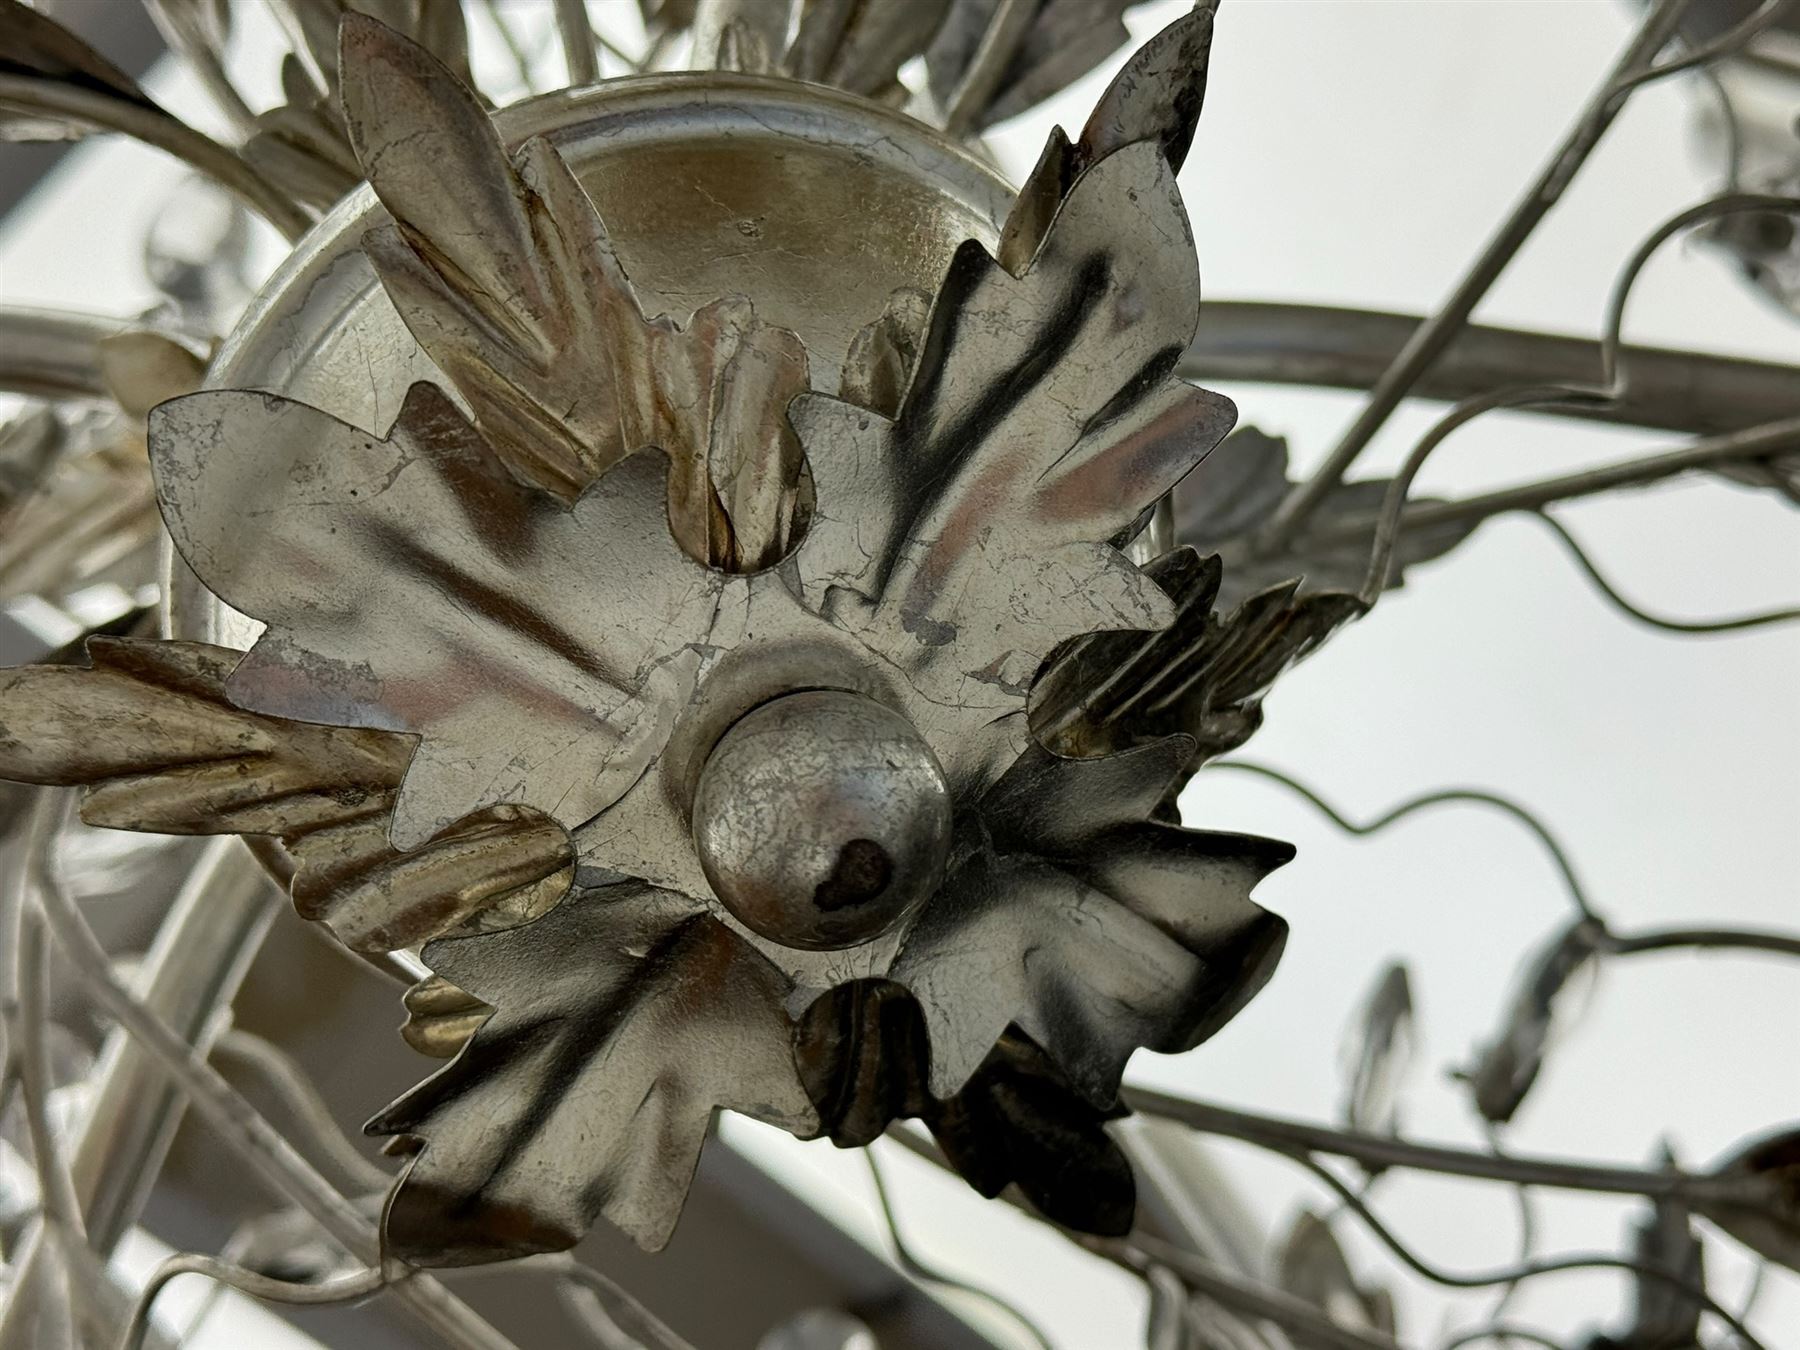 India Jane - silver finish metal chandelier - Image 7 of 8